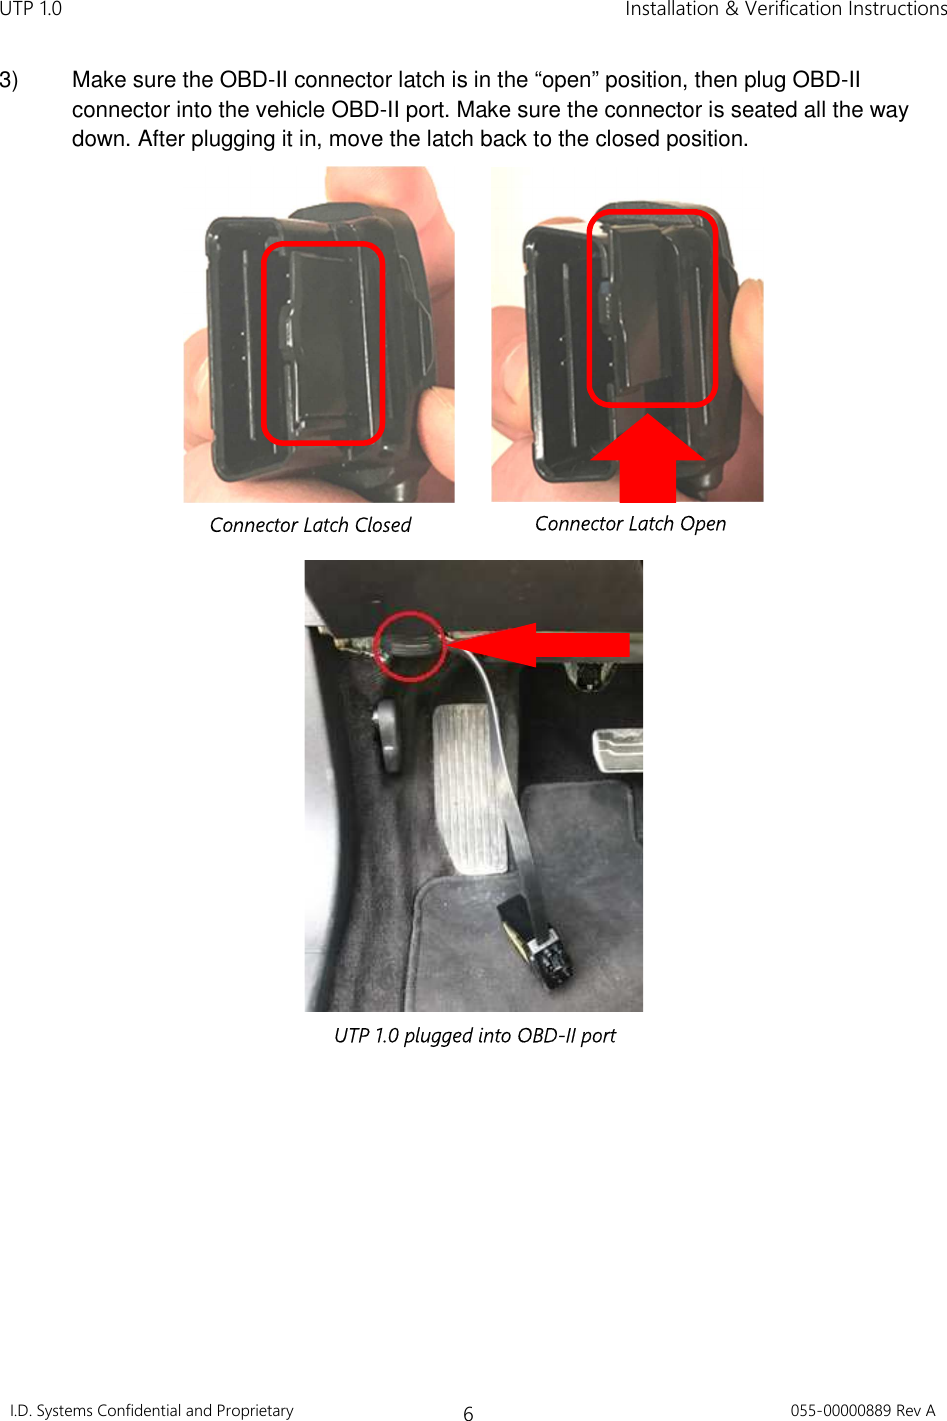 UTP 1.0    Installation &amp; Verification Instructions I.D. Systems Confidential and Proprietary 6 055-00000889 Rev A  3)  Make sure the OBD-II connector latch is in the “open” position, then plug OBD-II connector into the vehicle OBD-II port. Make sure the connector is seated all the way down. After plugging it in, move the latch back to the closed position.                 Connector Latch Closed  Connector Latch Open UTP 1.0 plugged into OBD-II port 